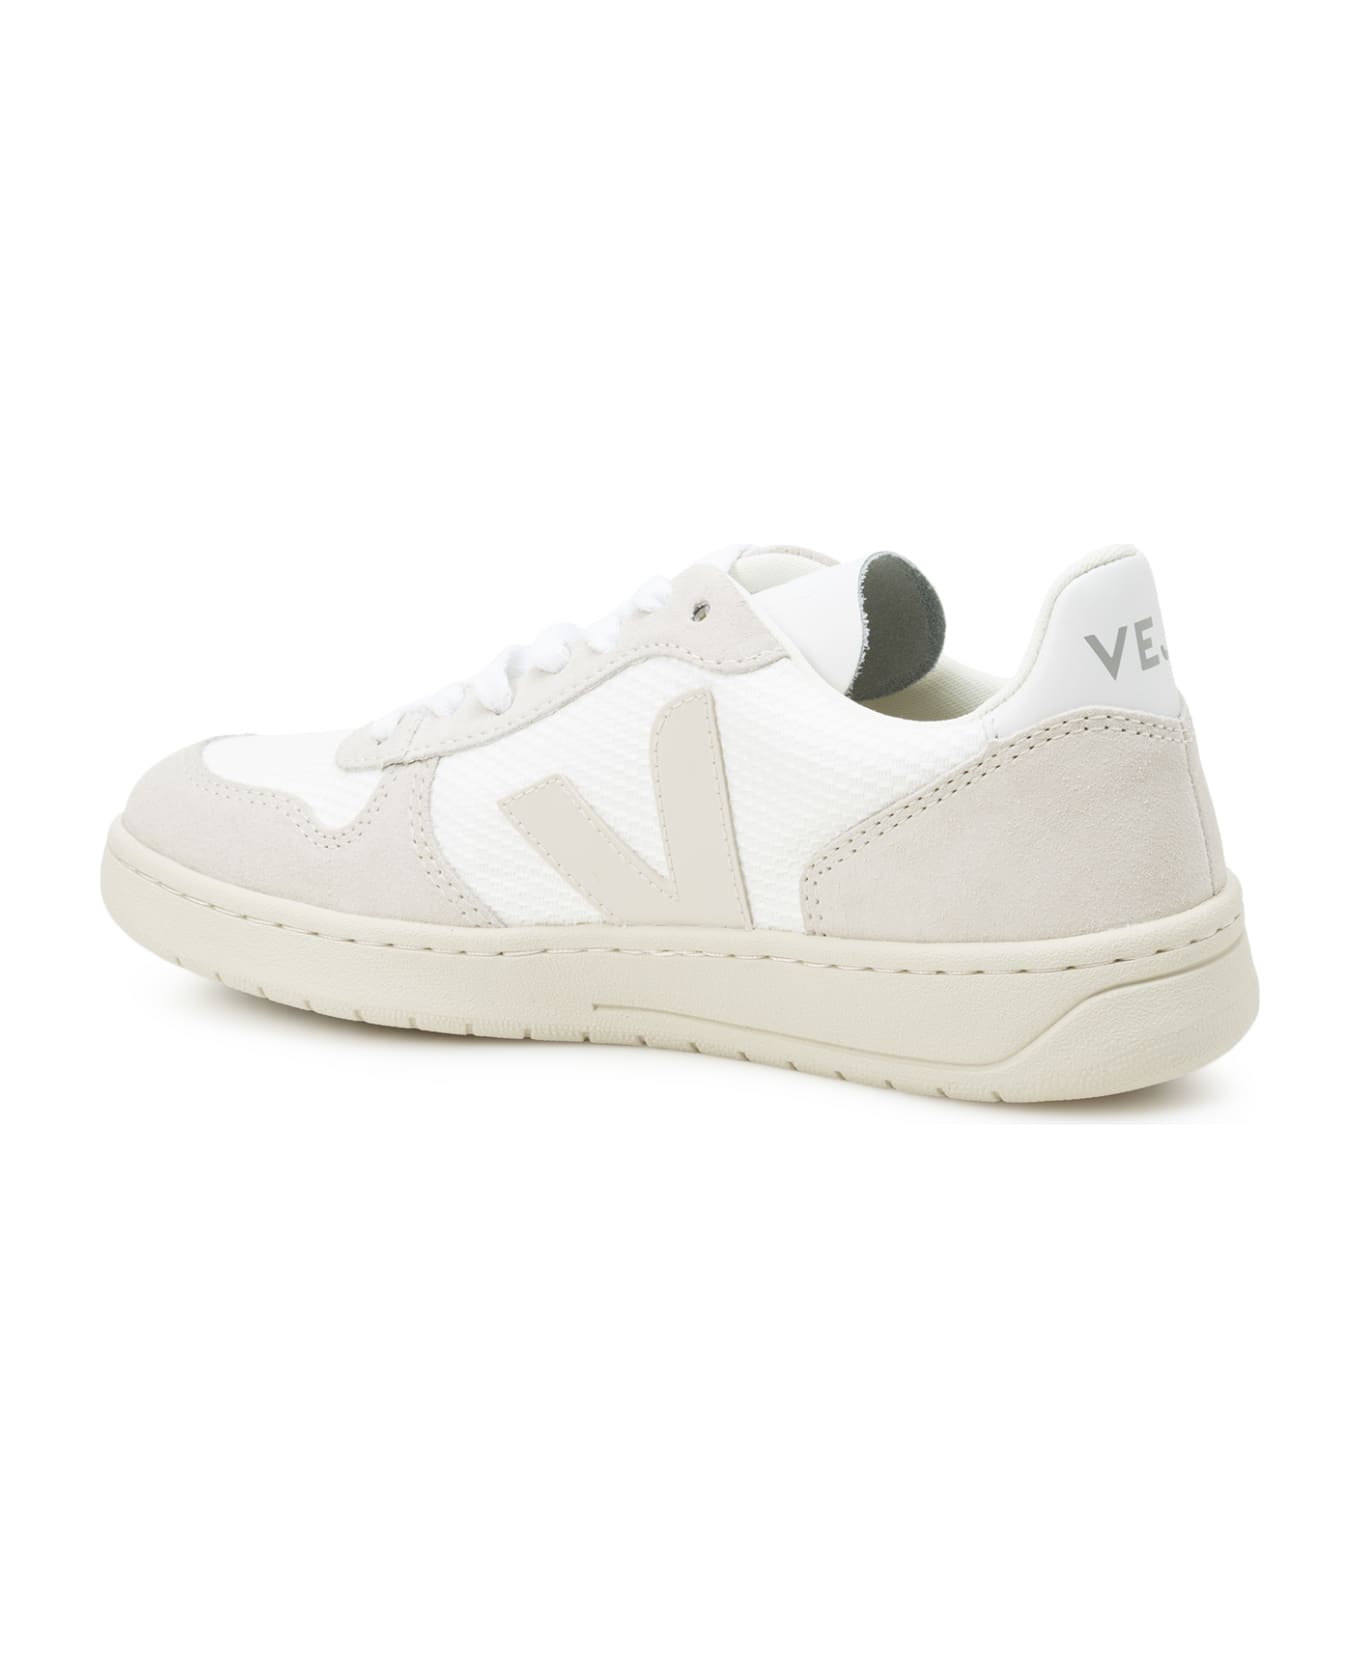 Veja Sneakers - White/natural pierre